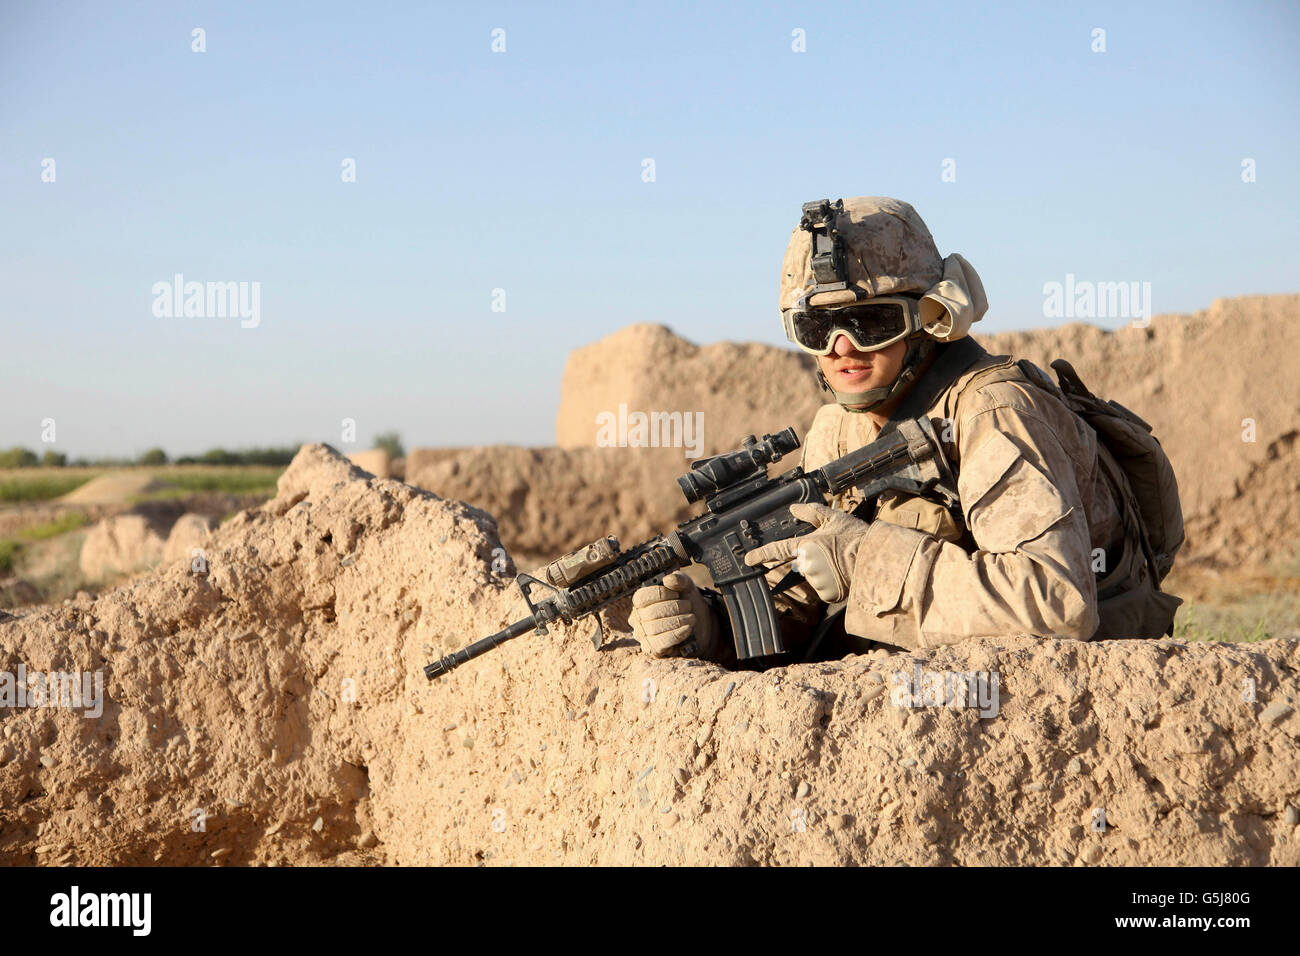 A U.S. Marine providing security during a road reconnaissance patrol in Afghanistan. Stock Photo